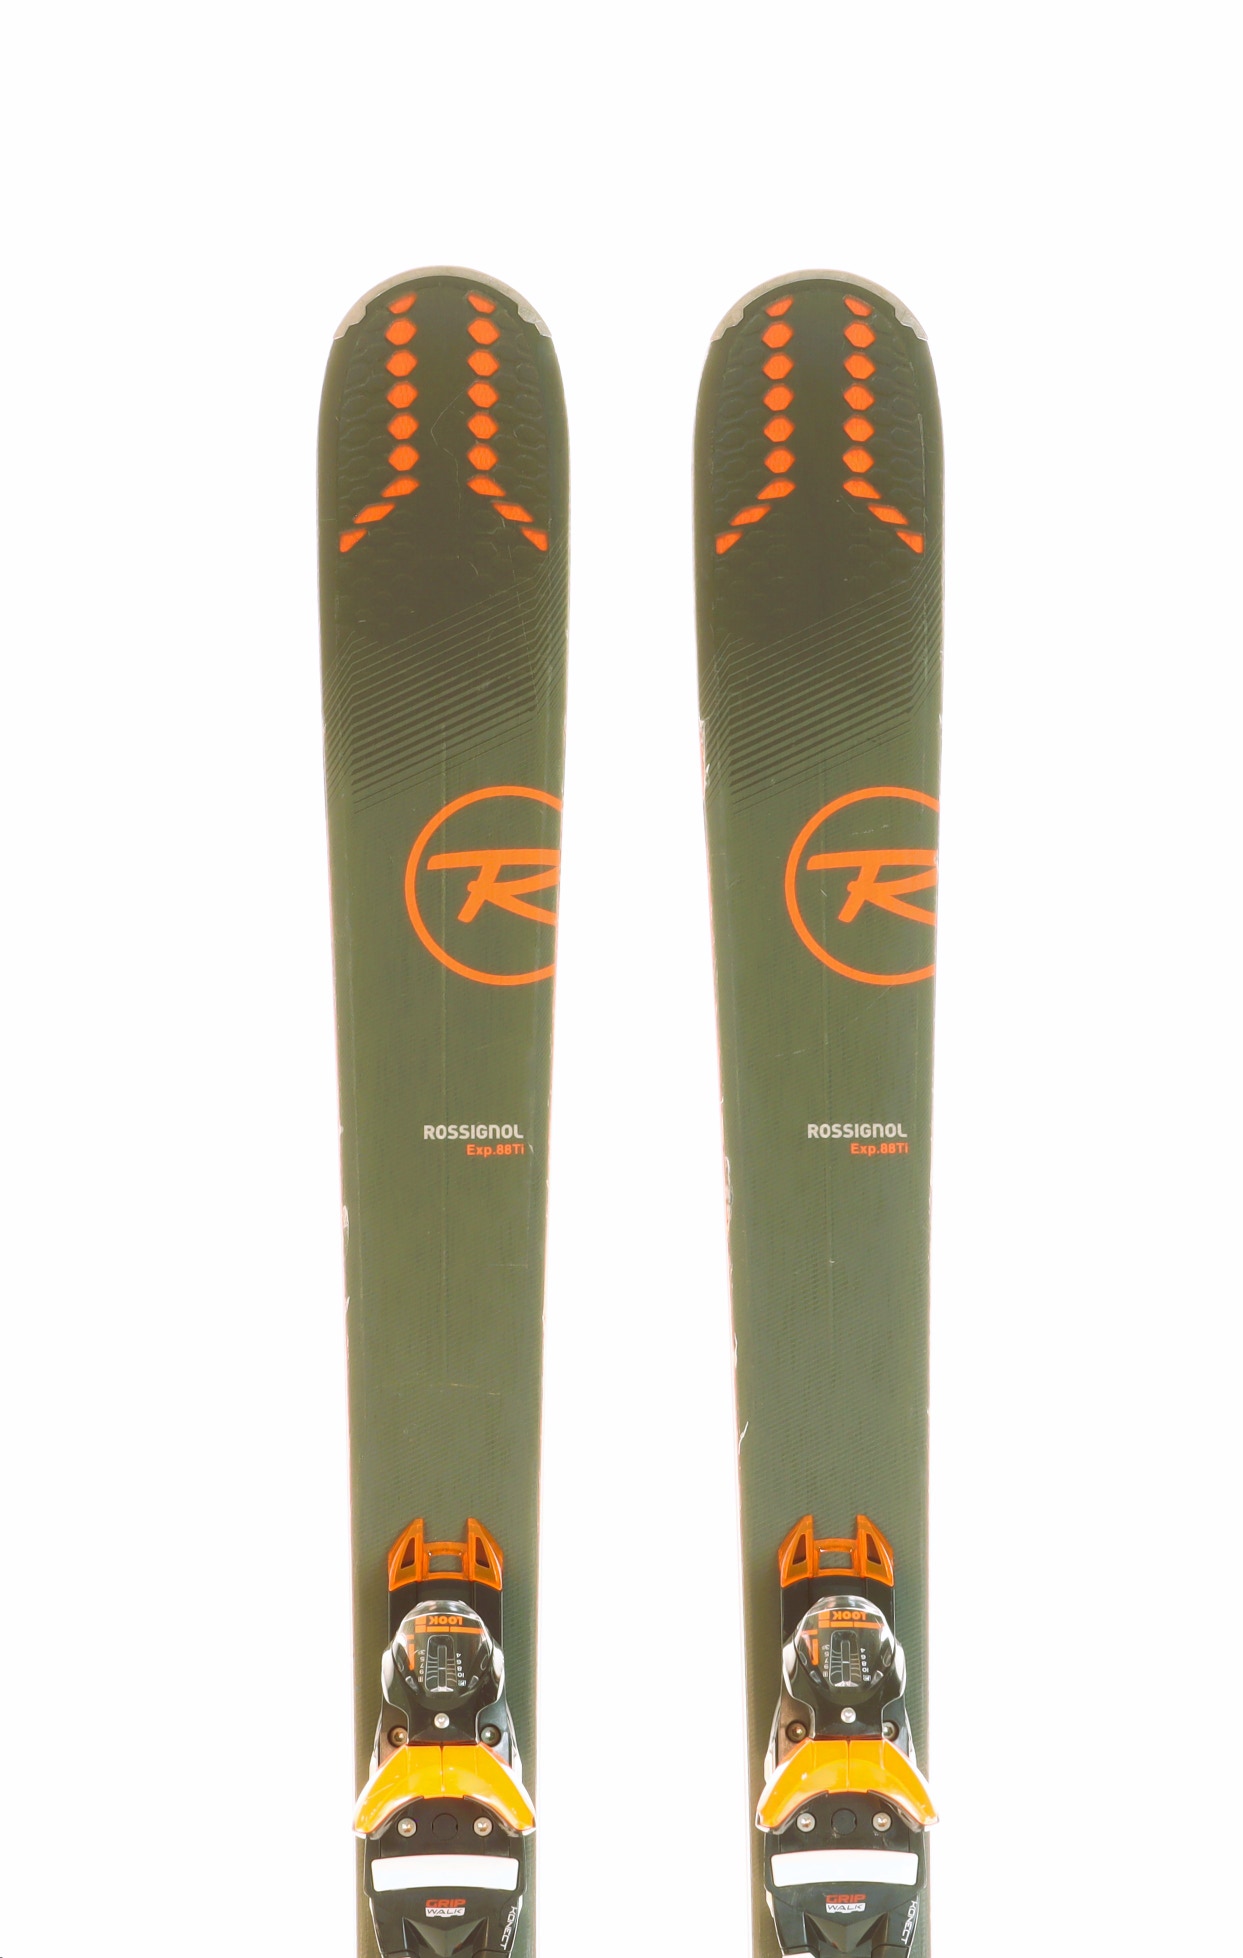 Used 2020 Rossignol Experience 88 TI Skis With Look SPX 12 Bindings Size 166 (Option 230358)